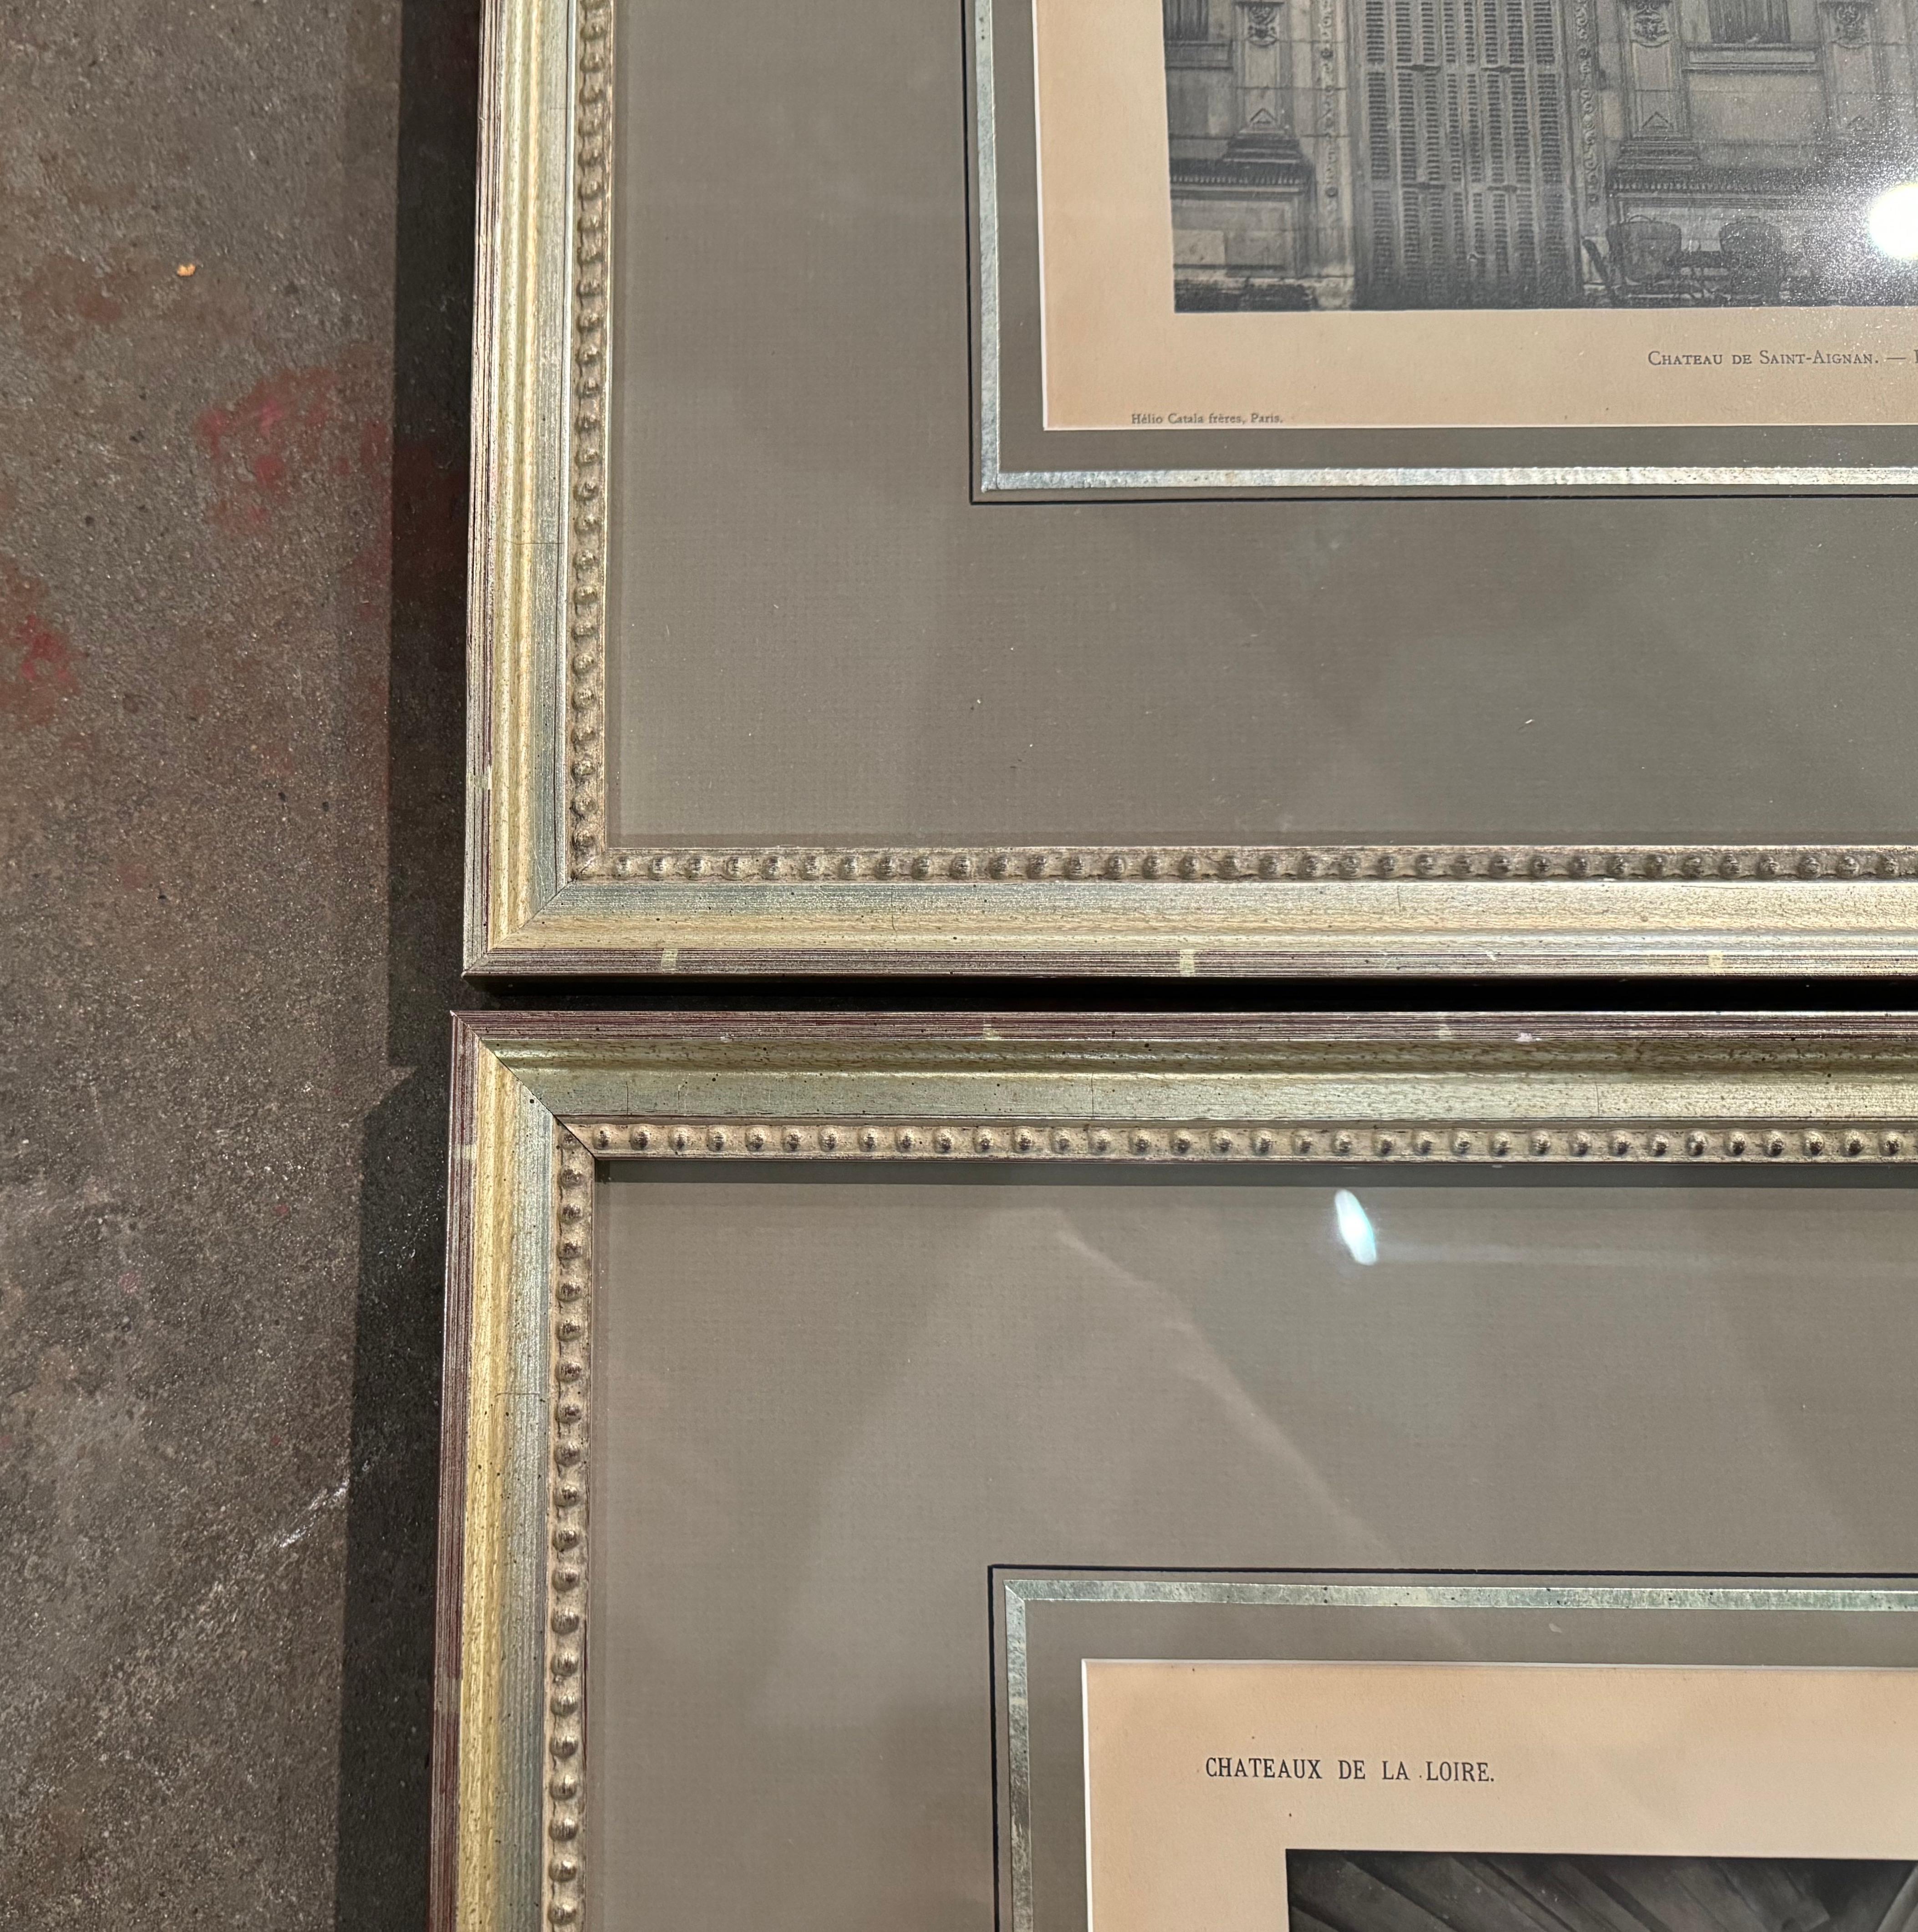 19th Century French Prints in Frames, 